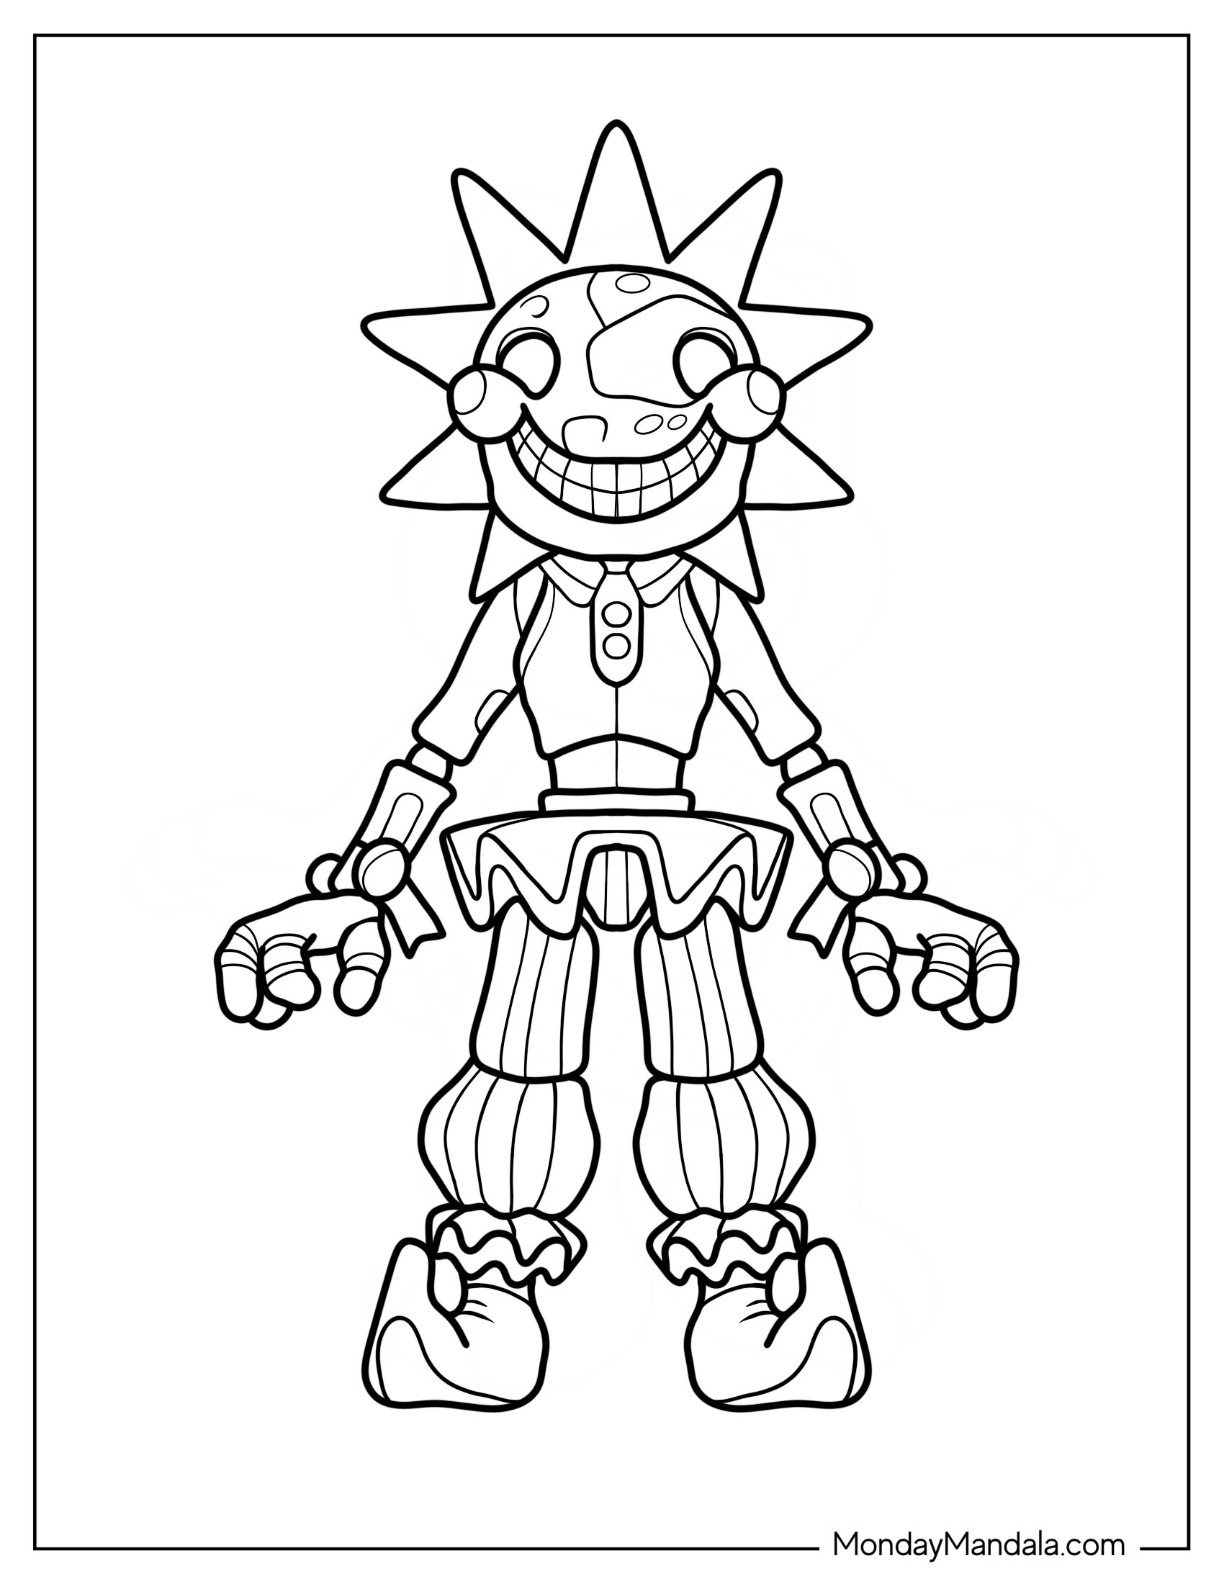 Five Nights At Freddie's Coloring Pages ...